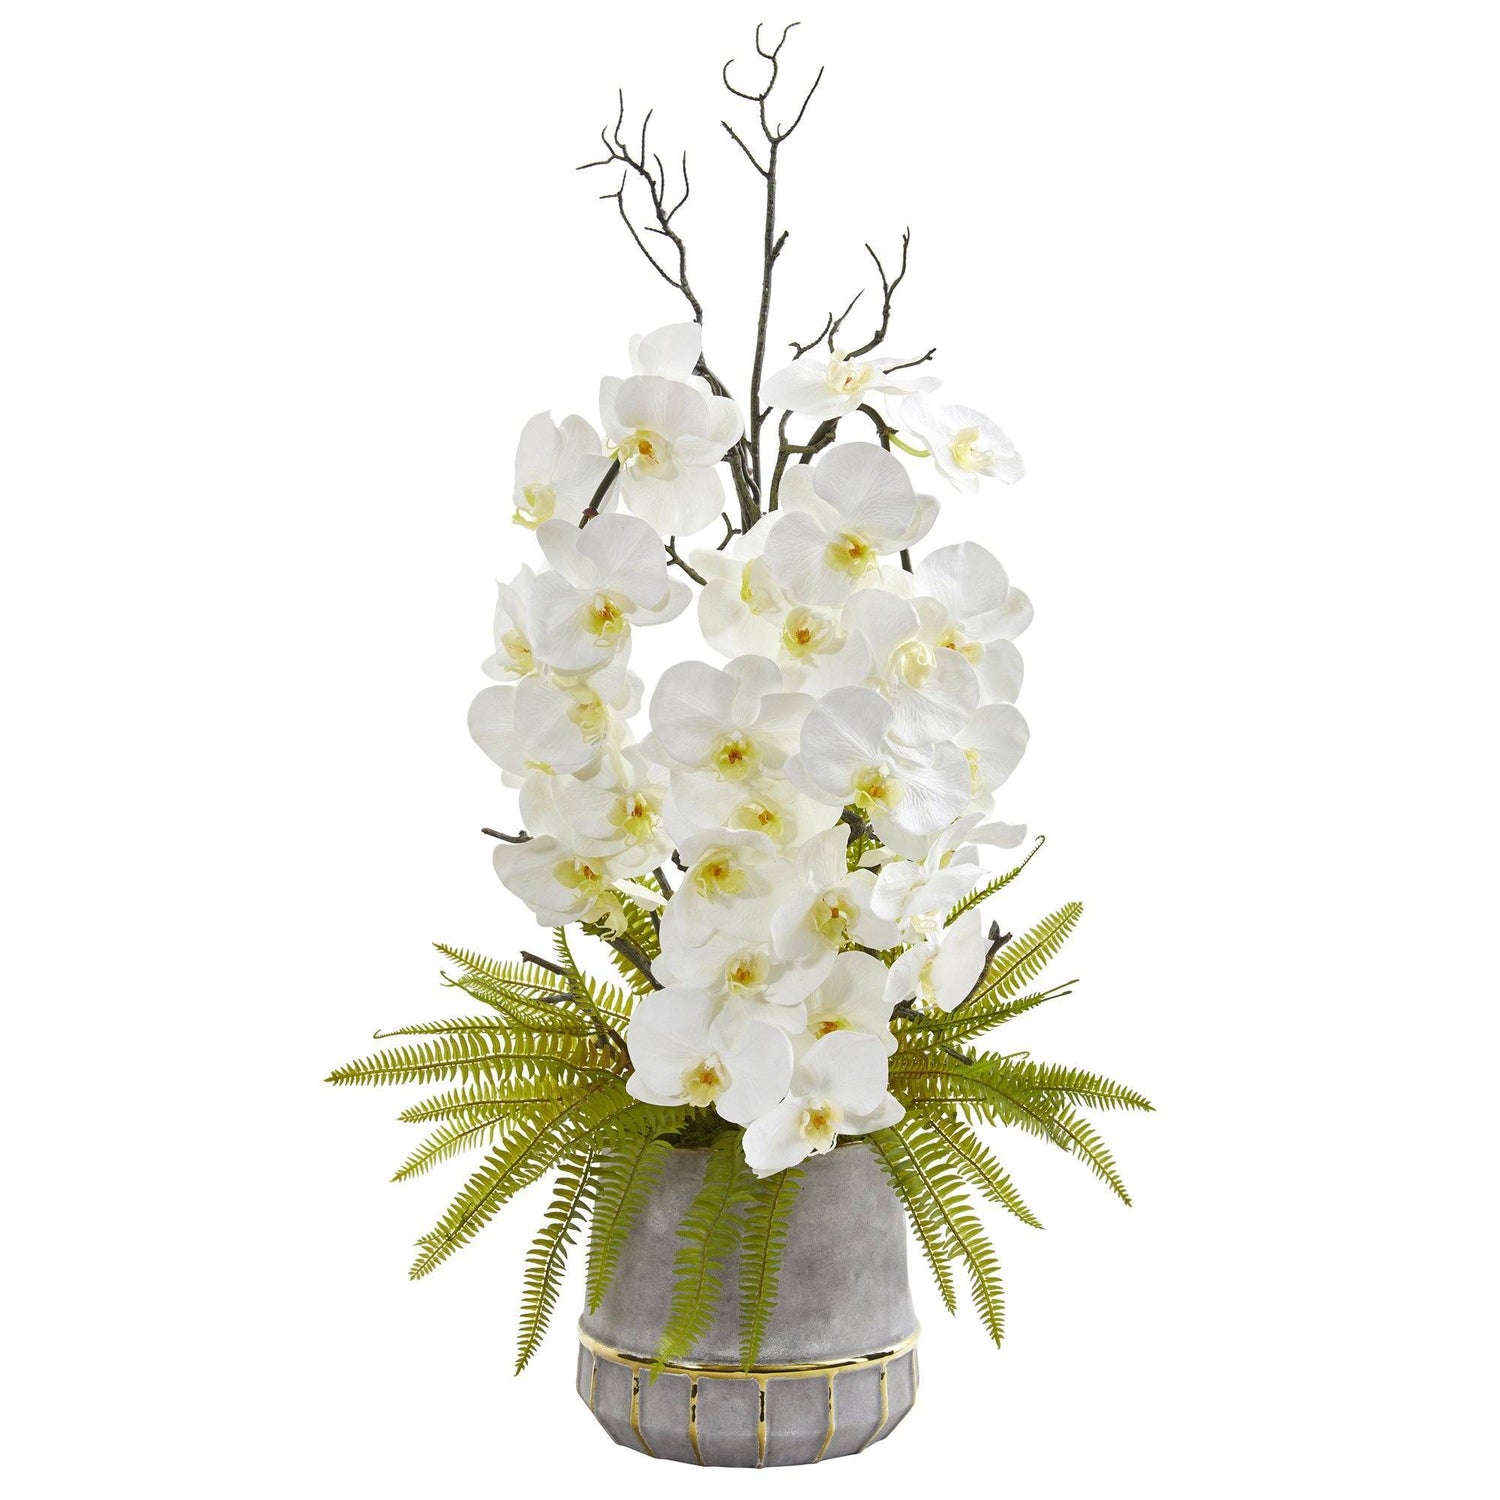 35” Phalaenopsis Orchid and Fern Artificial Arrangement in Stoneware Vase with Gold Trimming